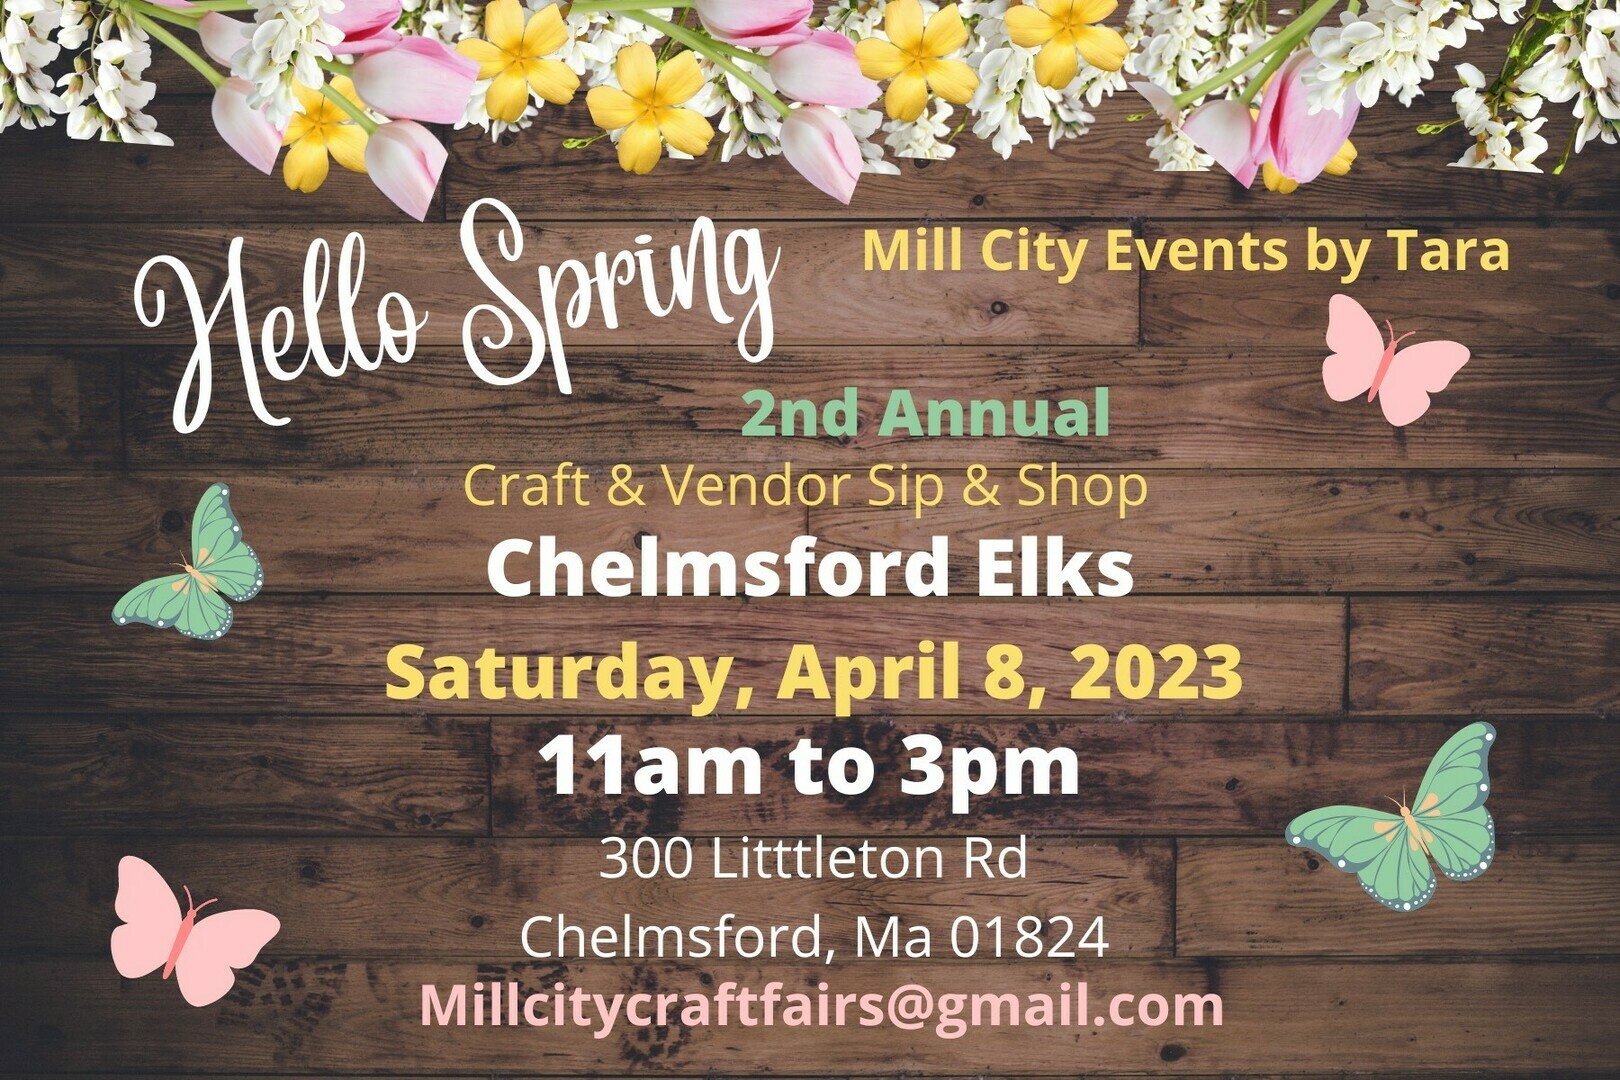 Hello Spring 2nd Annual Craft and Vendor Sip and Shop, Chelmsford, Massachusetts, United States